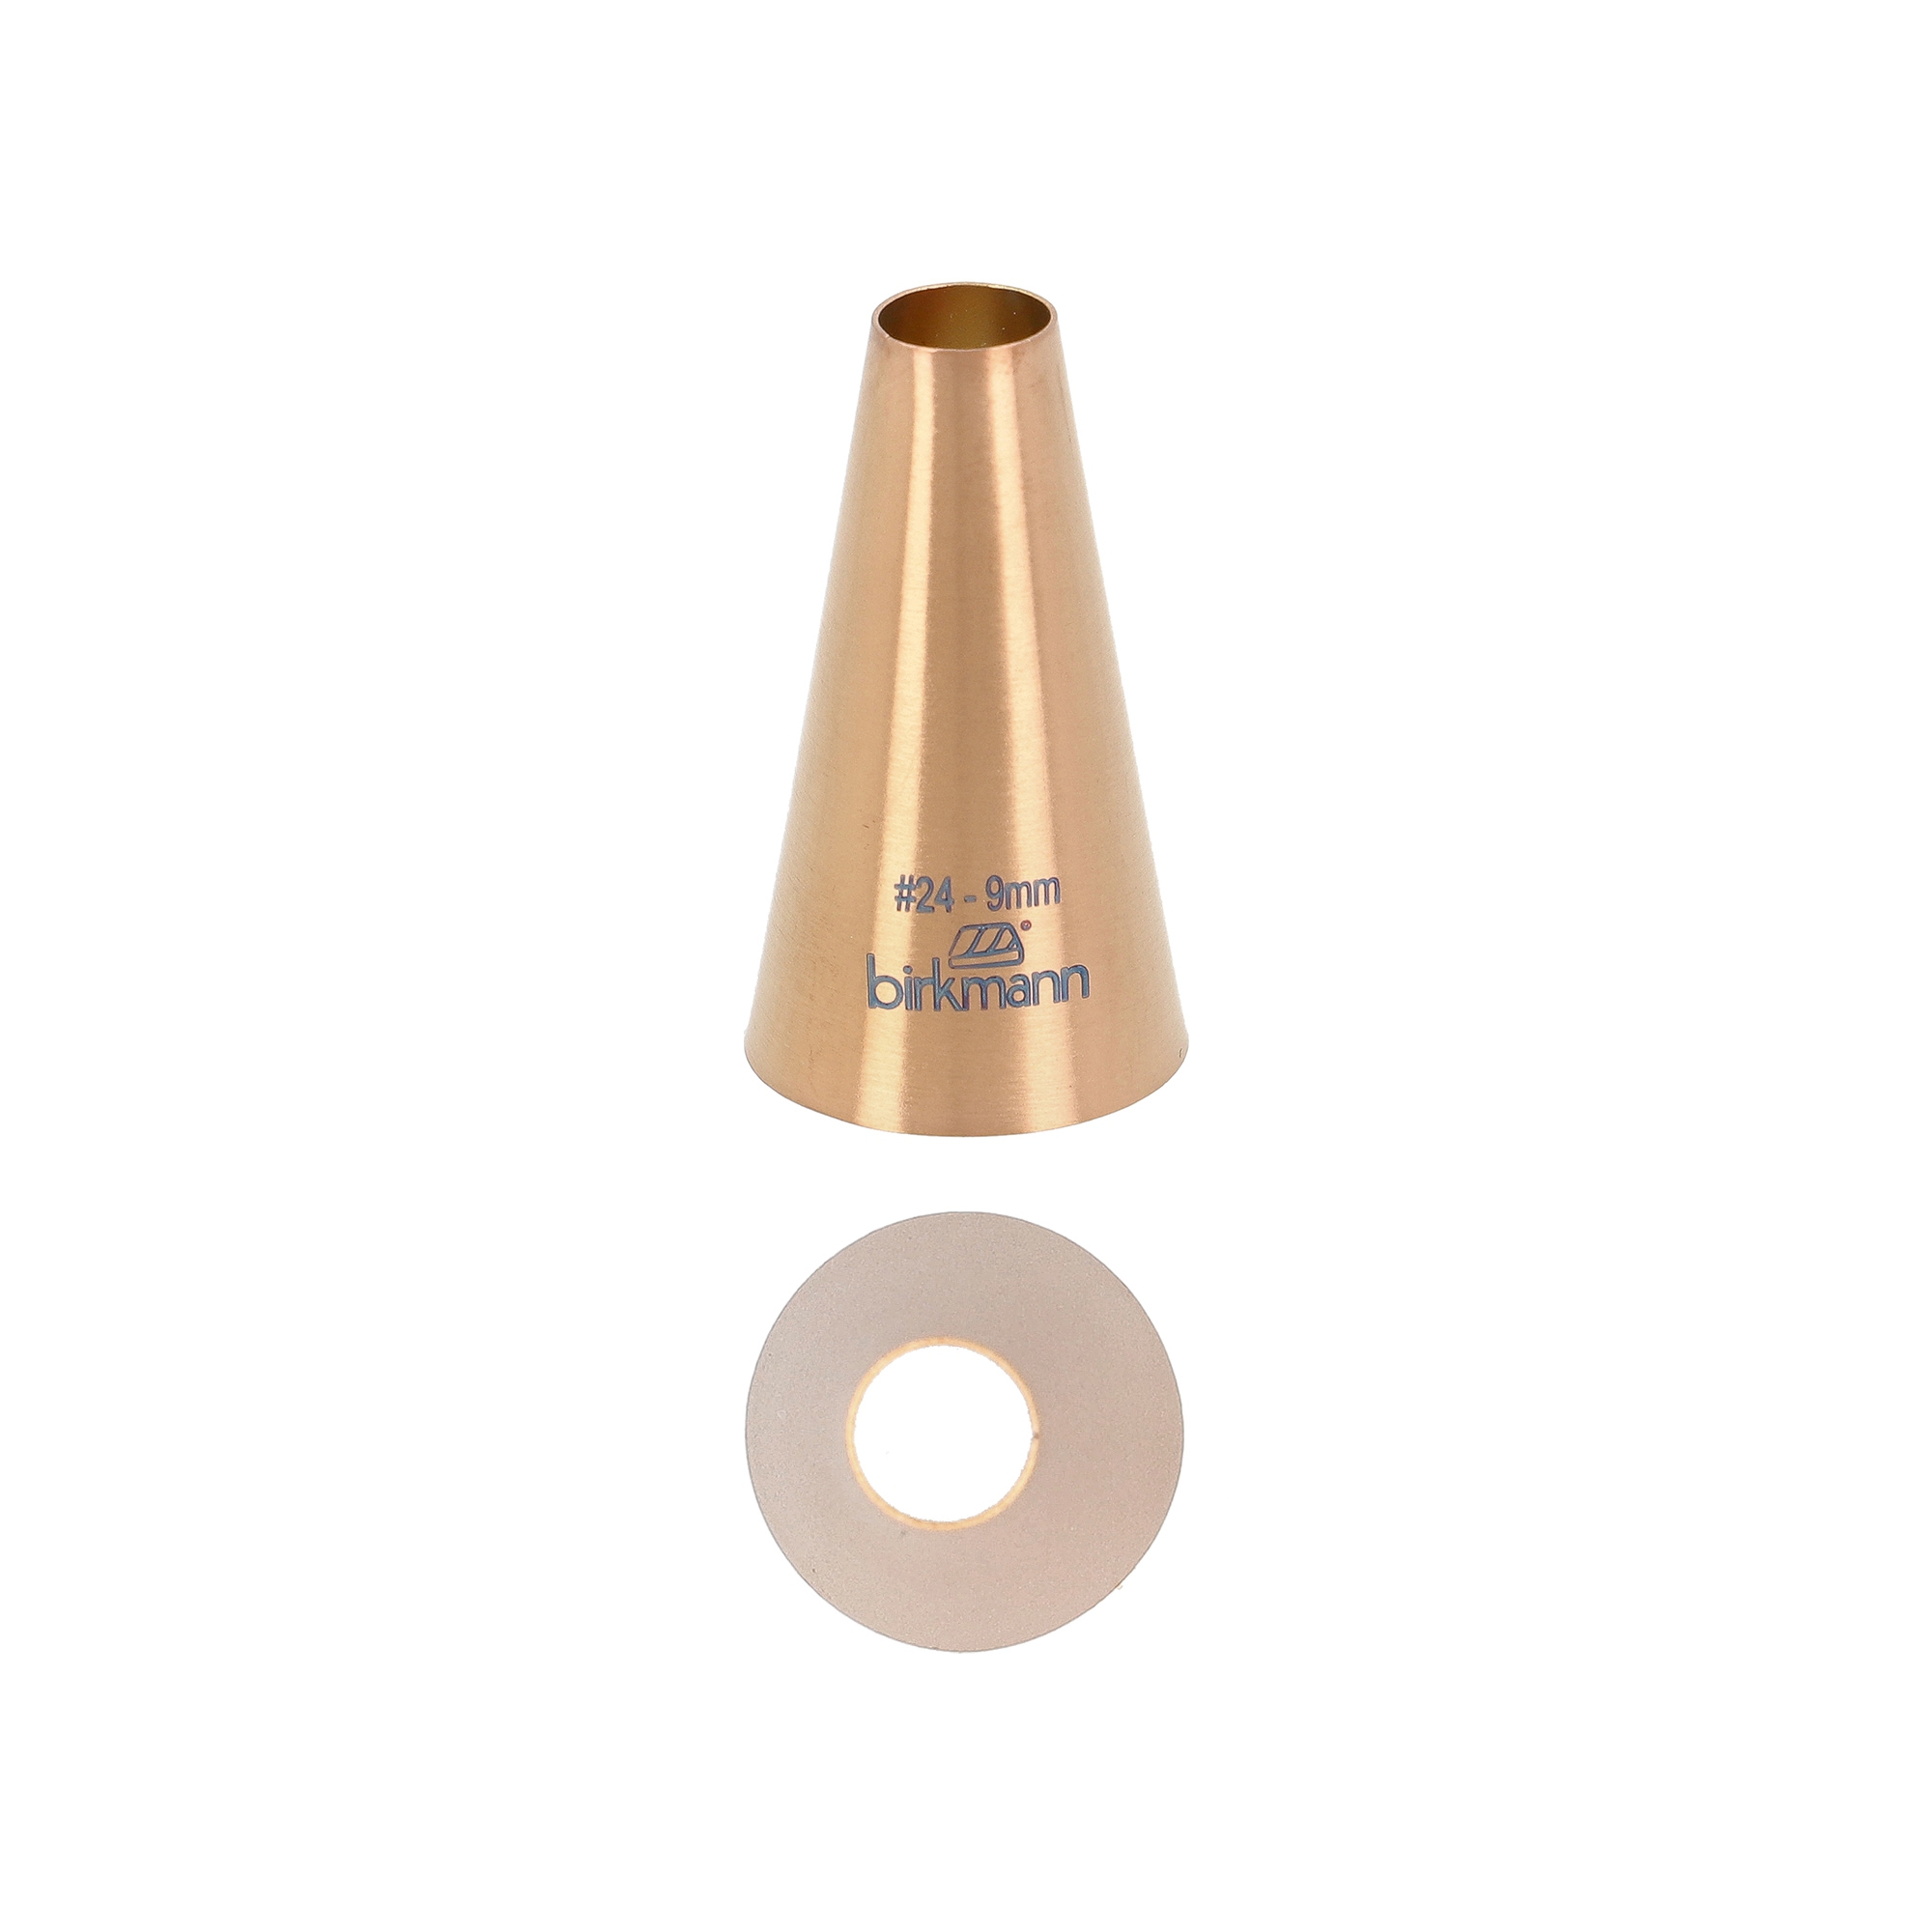 Birkmann - perforated nozzle copper colored #24 - 9mm